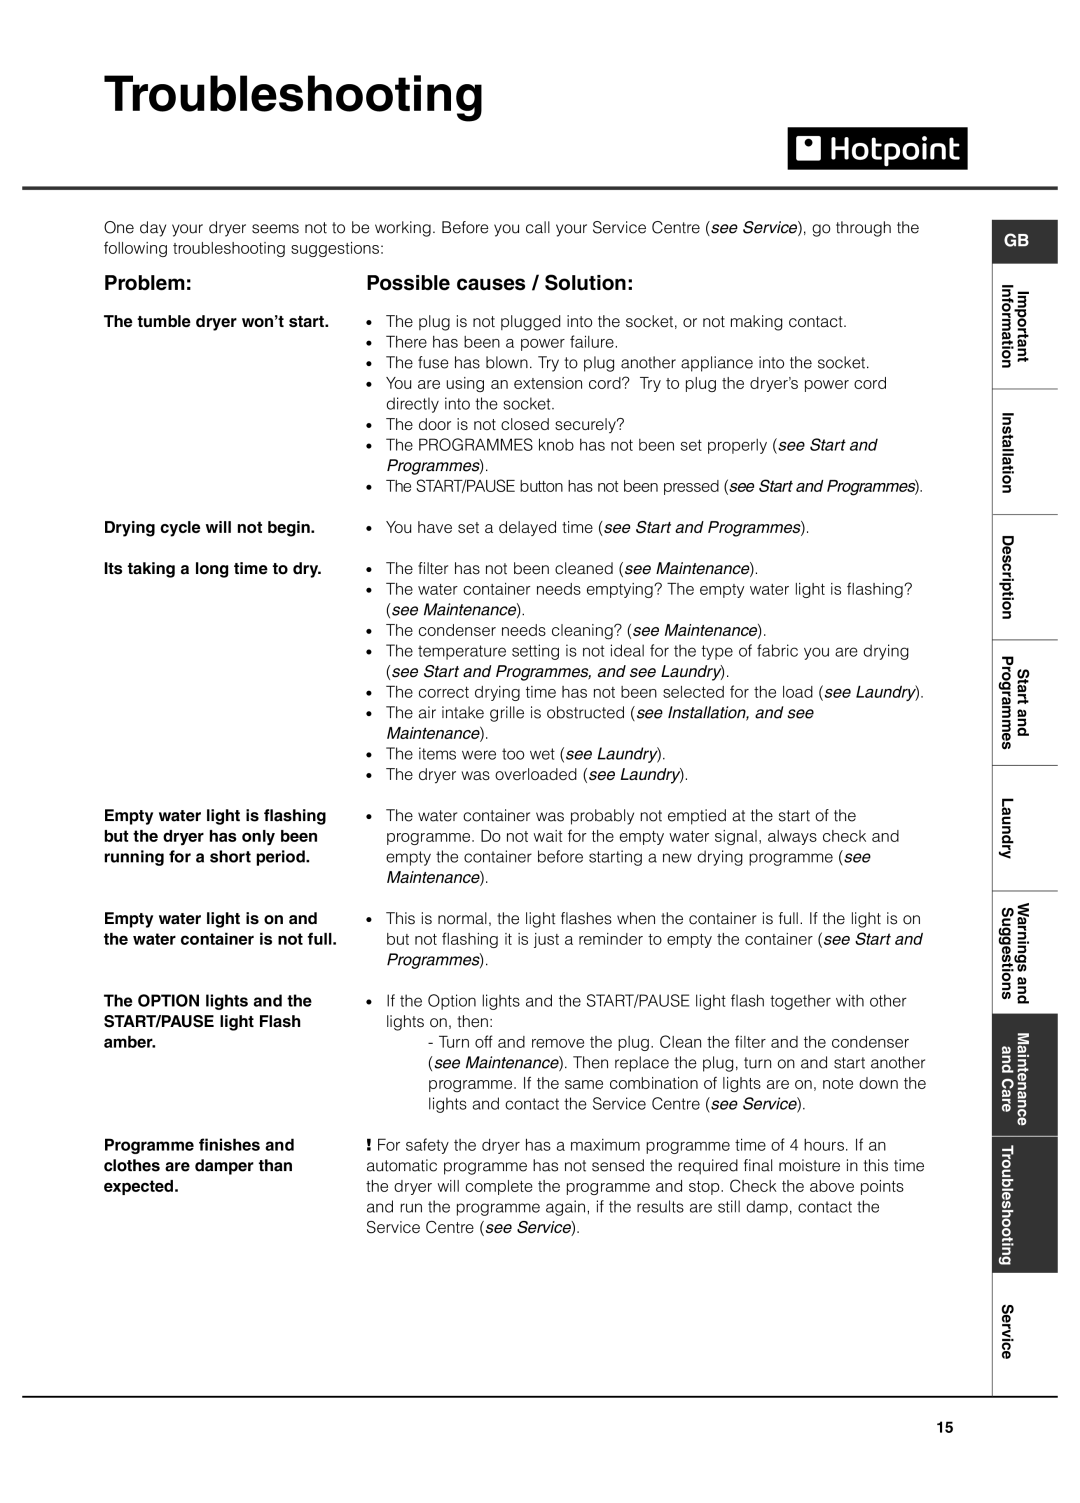 Hotpoint TCEl 87B Experience manual Troubleshooting, Problem, Possible causes / Solution, Programmes 